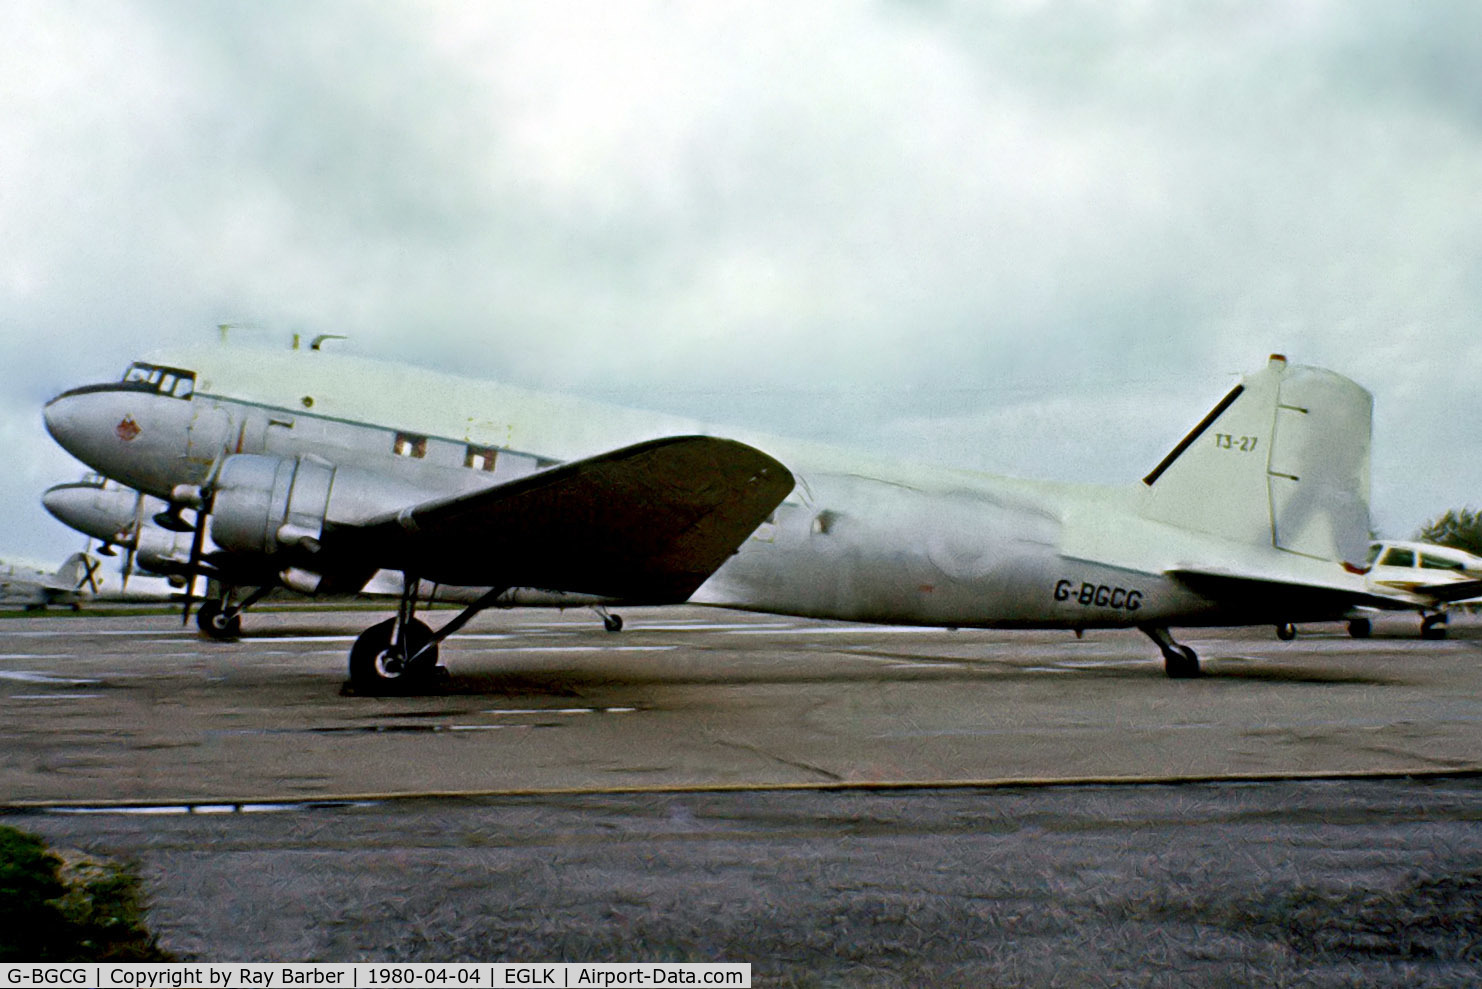 G-BGCG, 1944 Douglas C-47A Skytrain C/N 20002, Douglas DC-3C-47A-85-DL [20002] (Fairoaks Aviation Services) Blackbushe~G 04/04/1980. From a slide . Stills wears former Spanish Air Force registration and you can make out the formers markings through the paintwork.